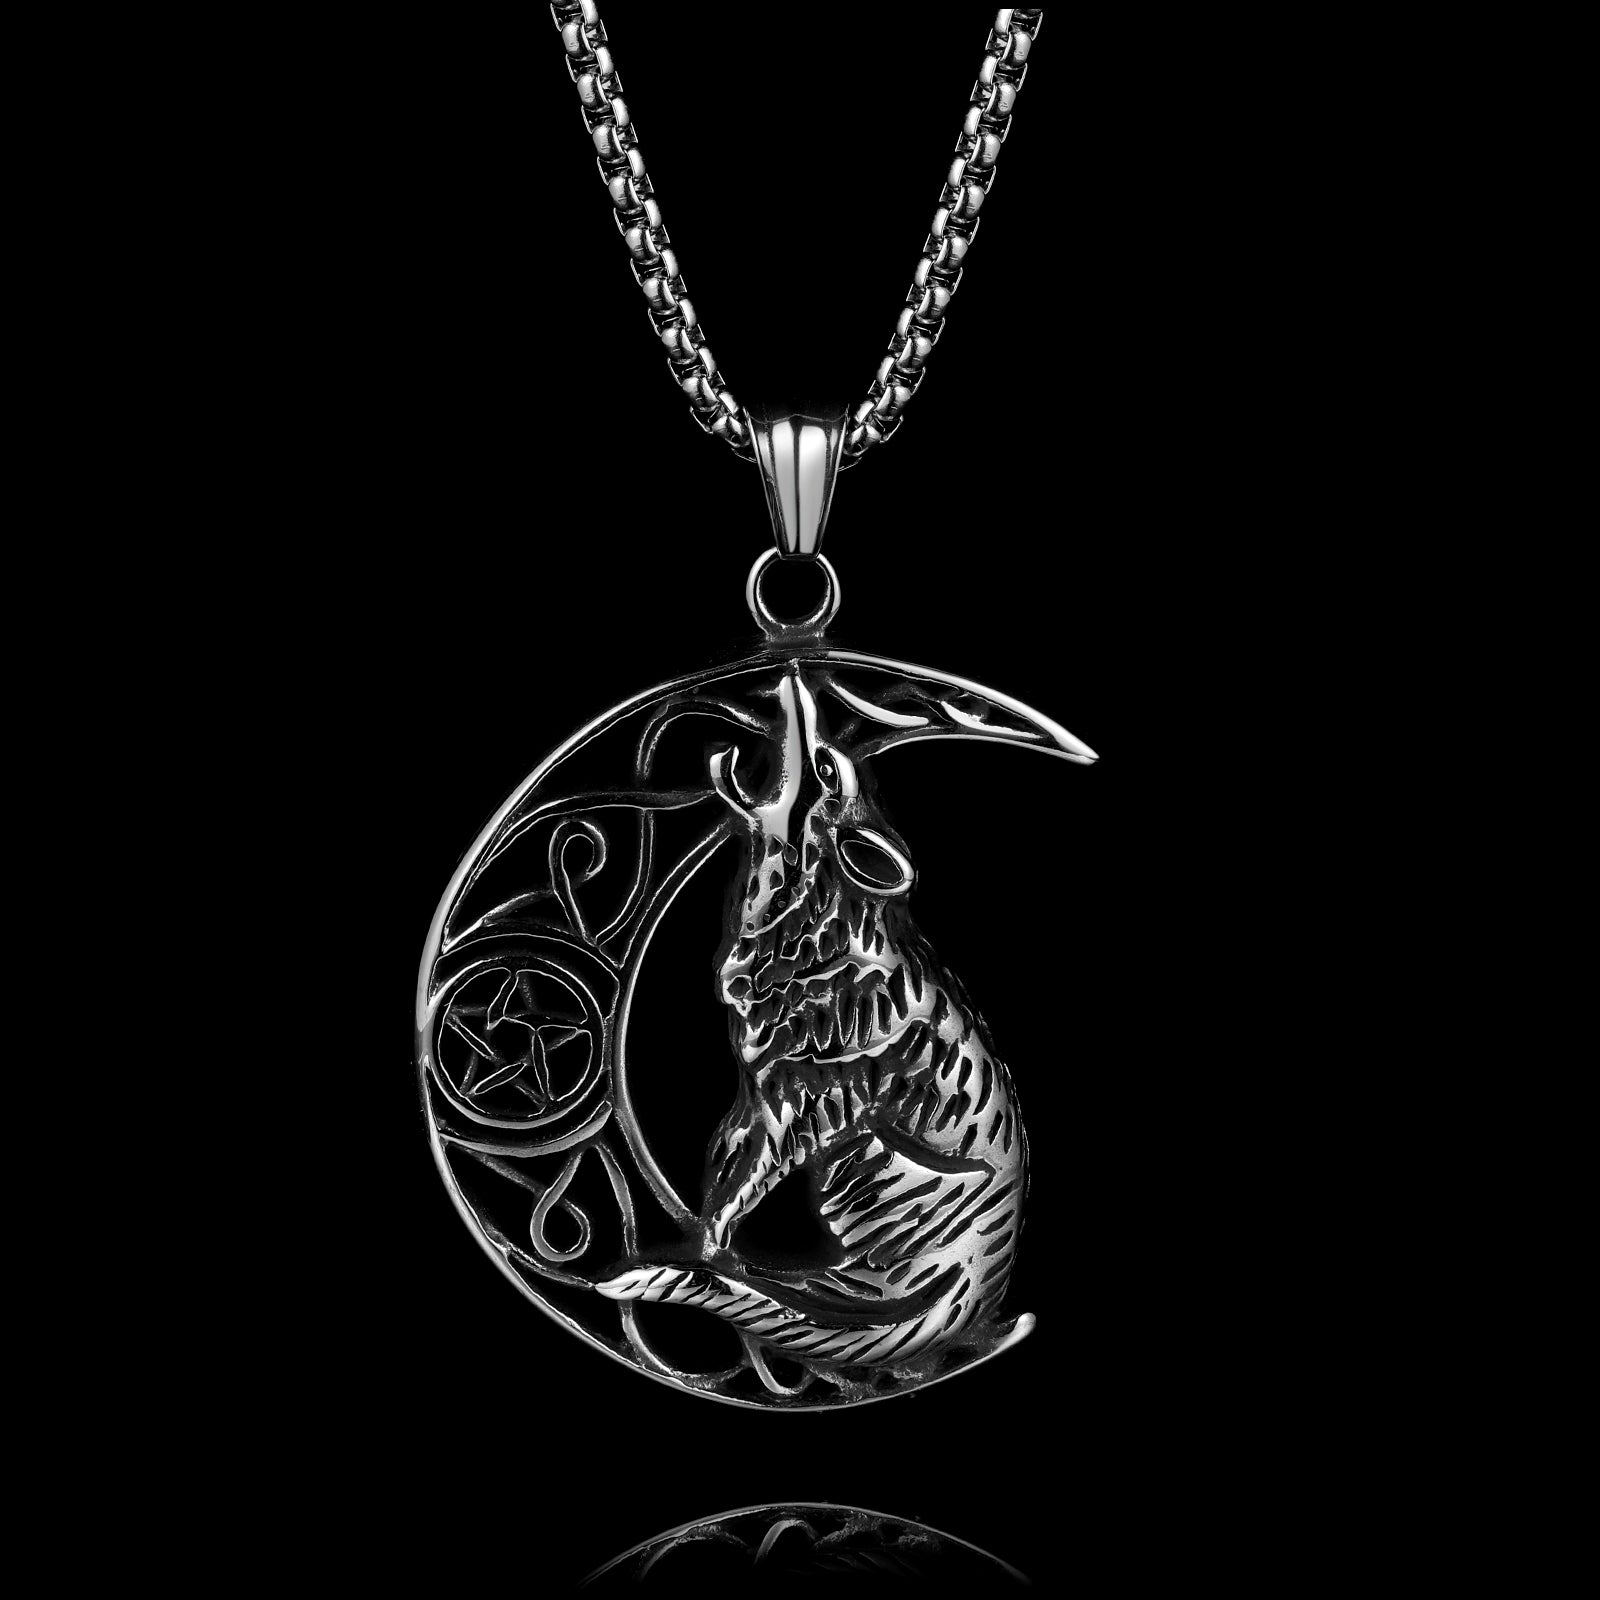 MOON WOLF. - NECKLACE